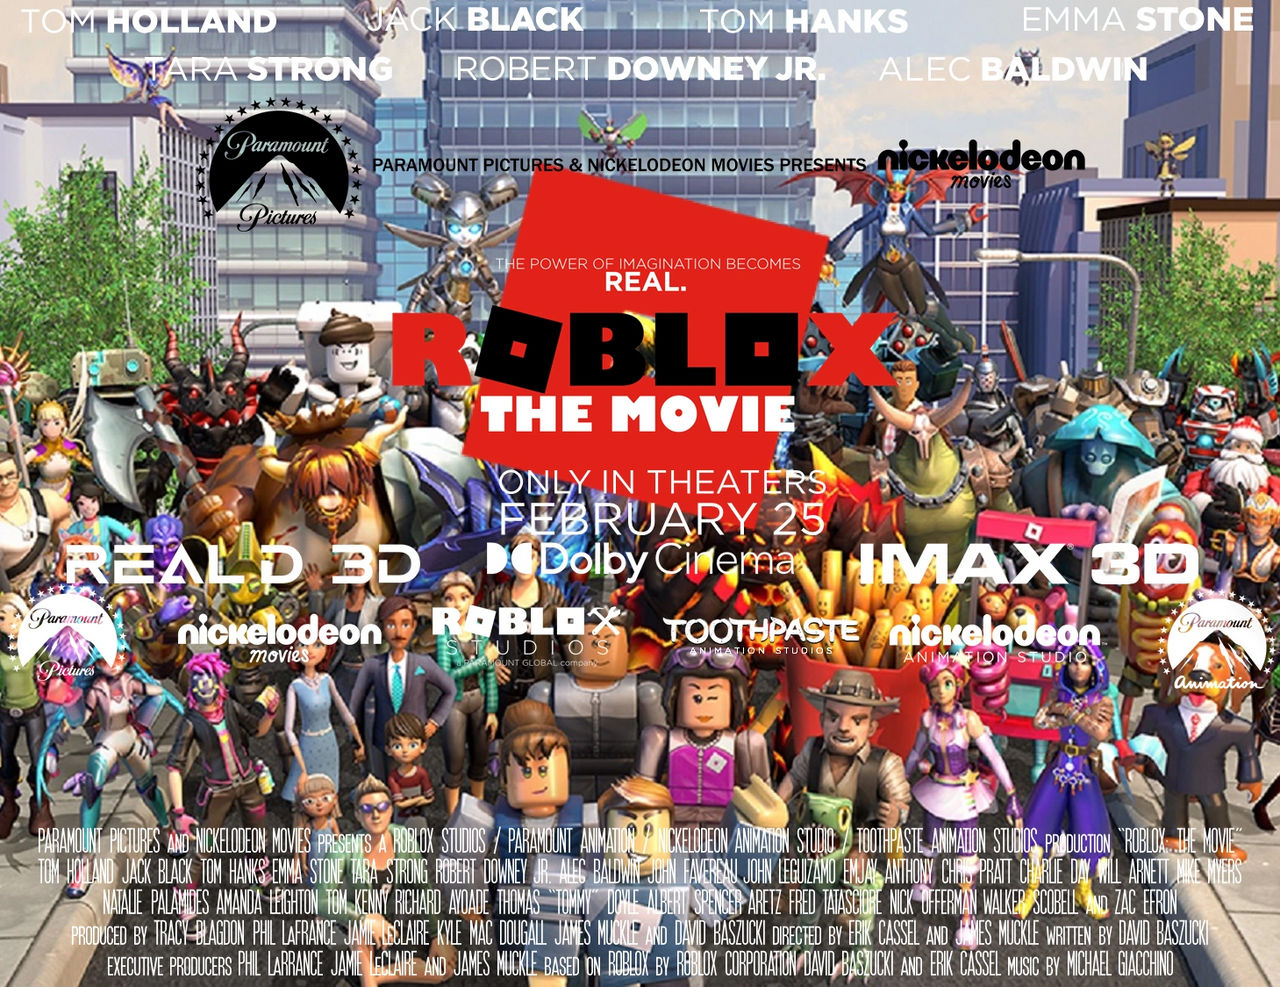 DreamWorks and Playstation's The Roblox Movie : r/DreamWorksAnimation